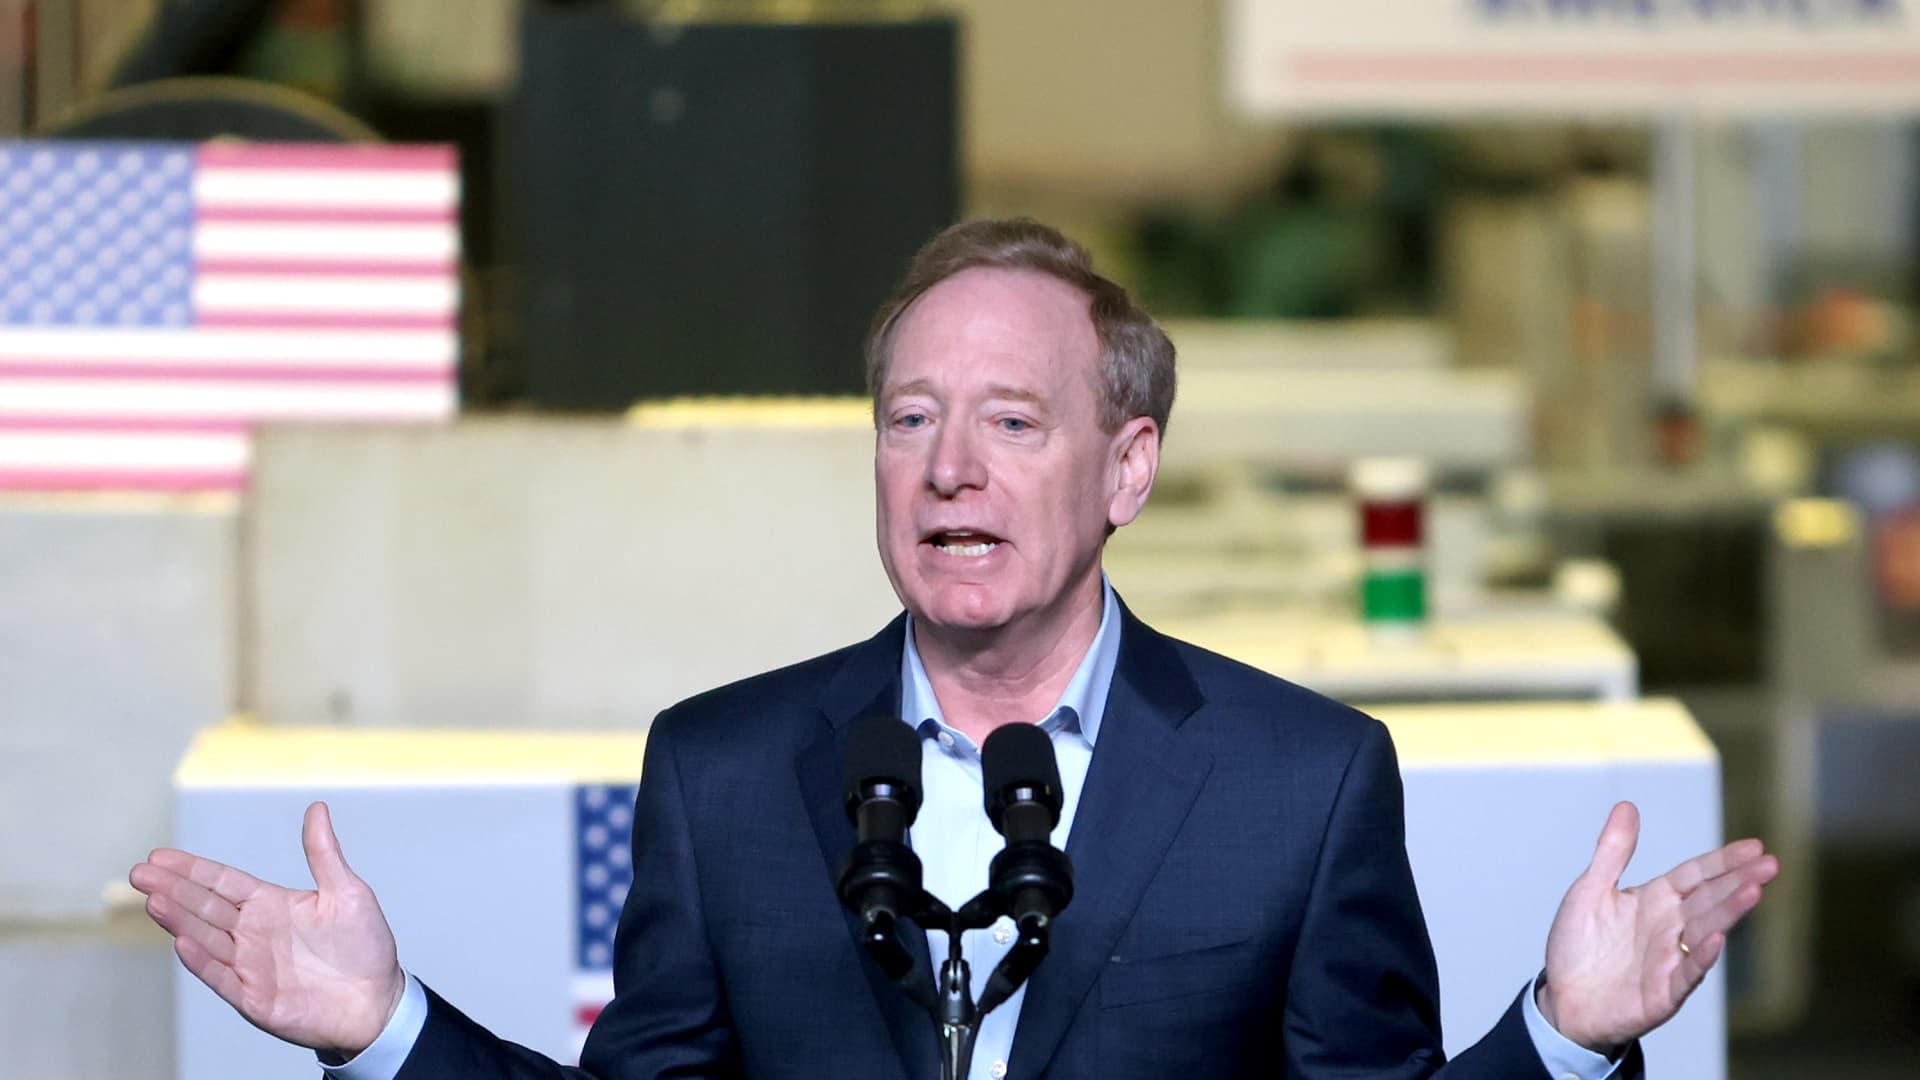 House committee asks Microsoft’s Brad Smith to attend hearing on security lapses